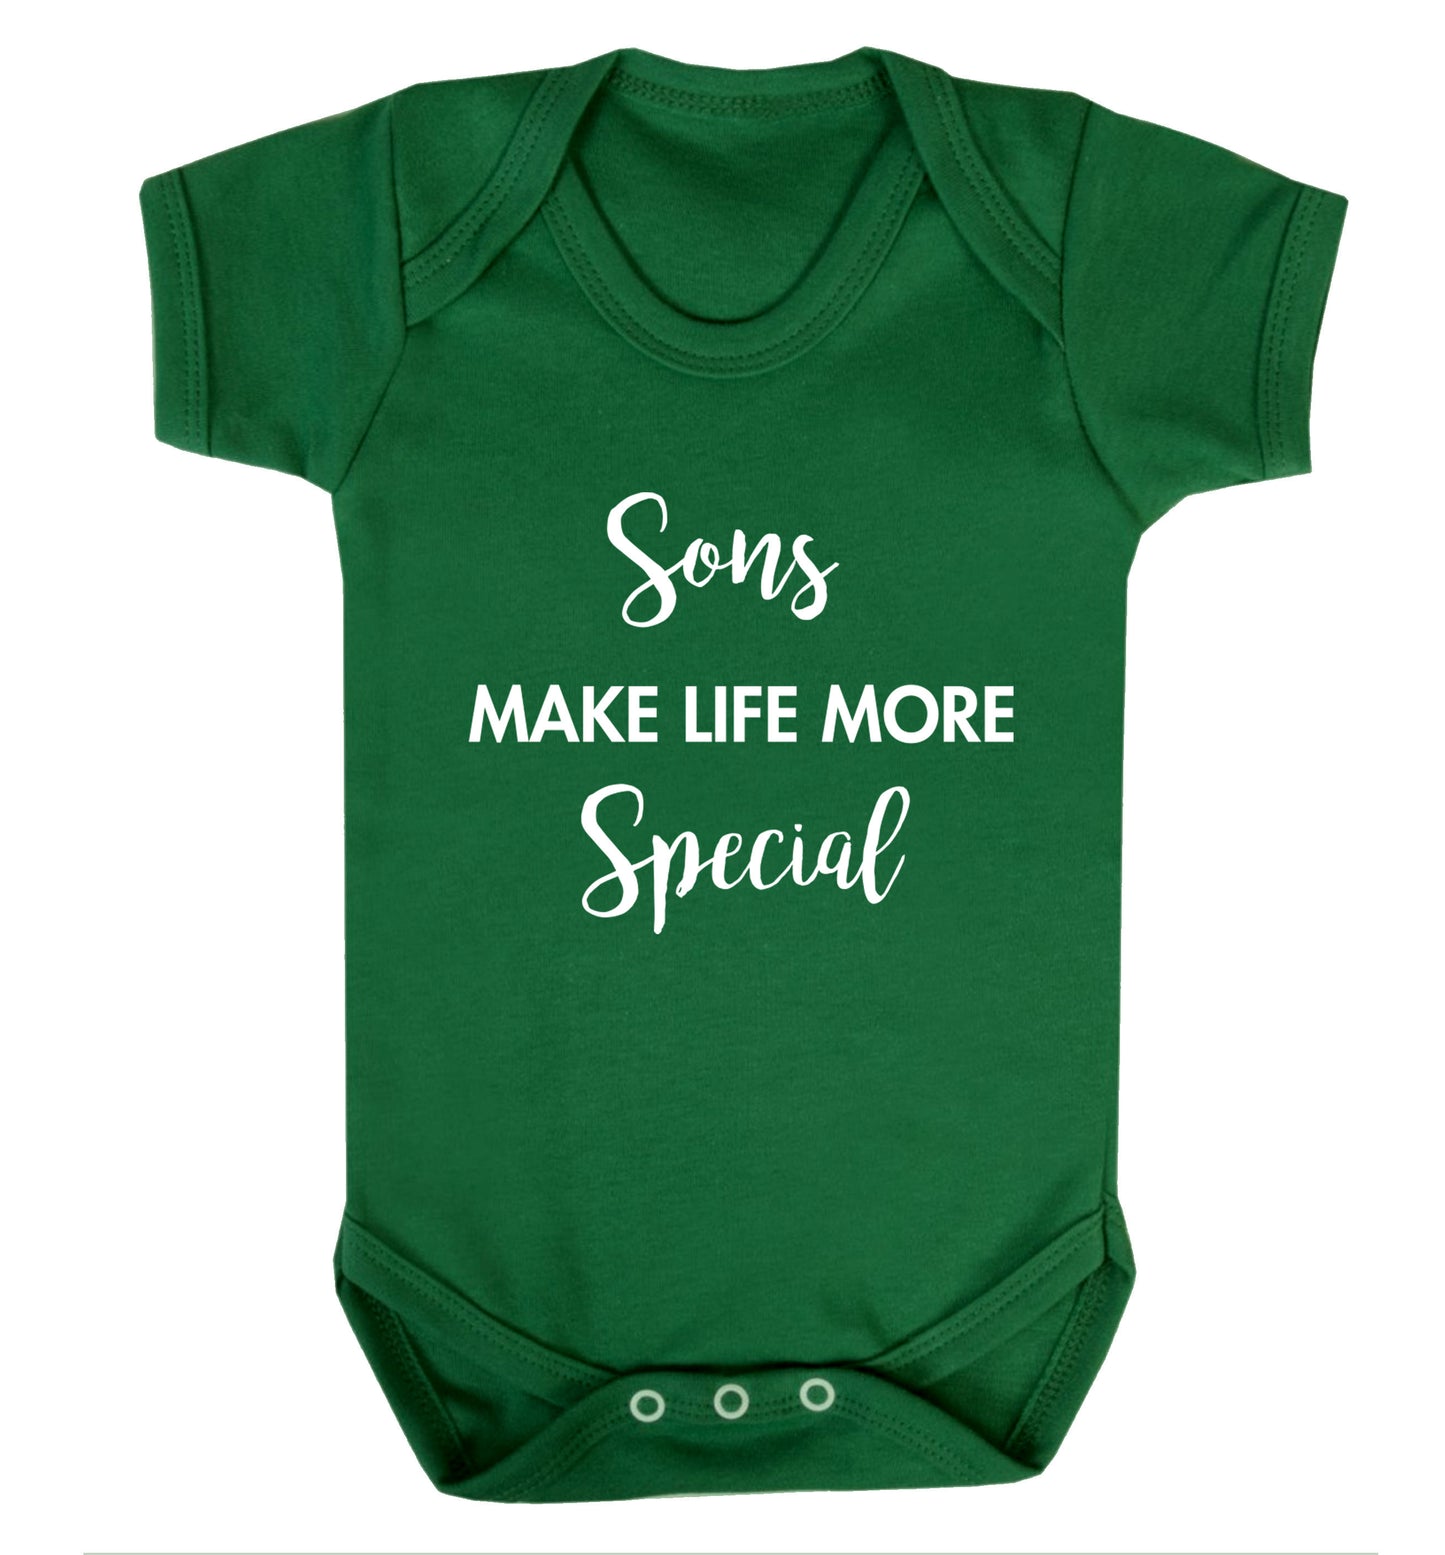 Daughters make life more special Baby Vest green 18-24 months